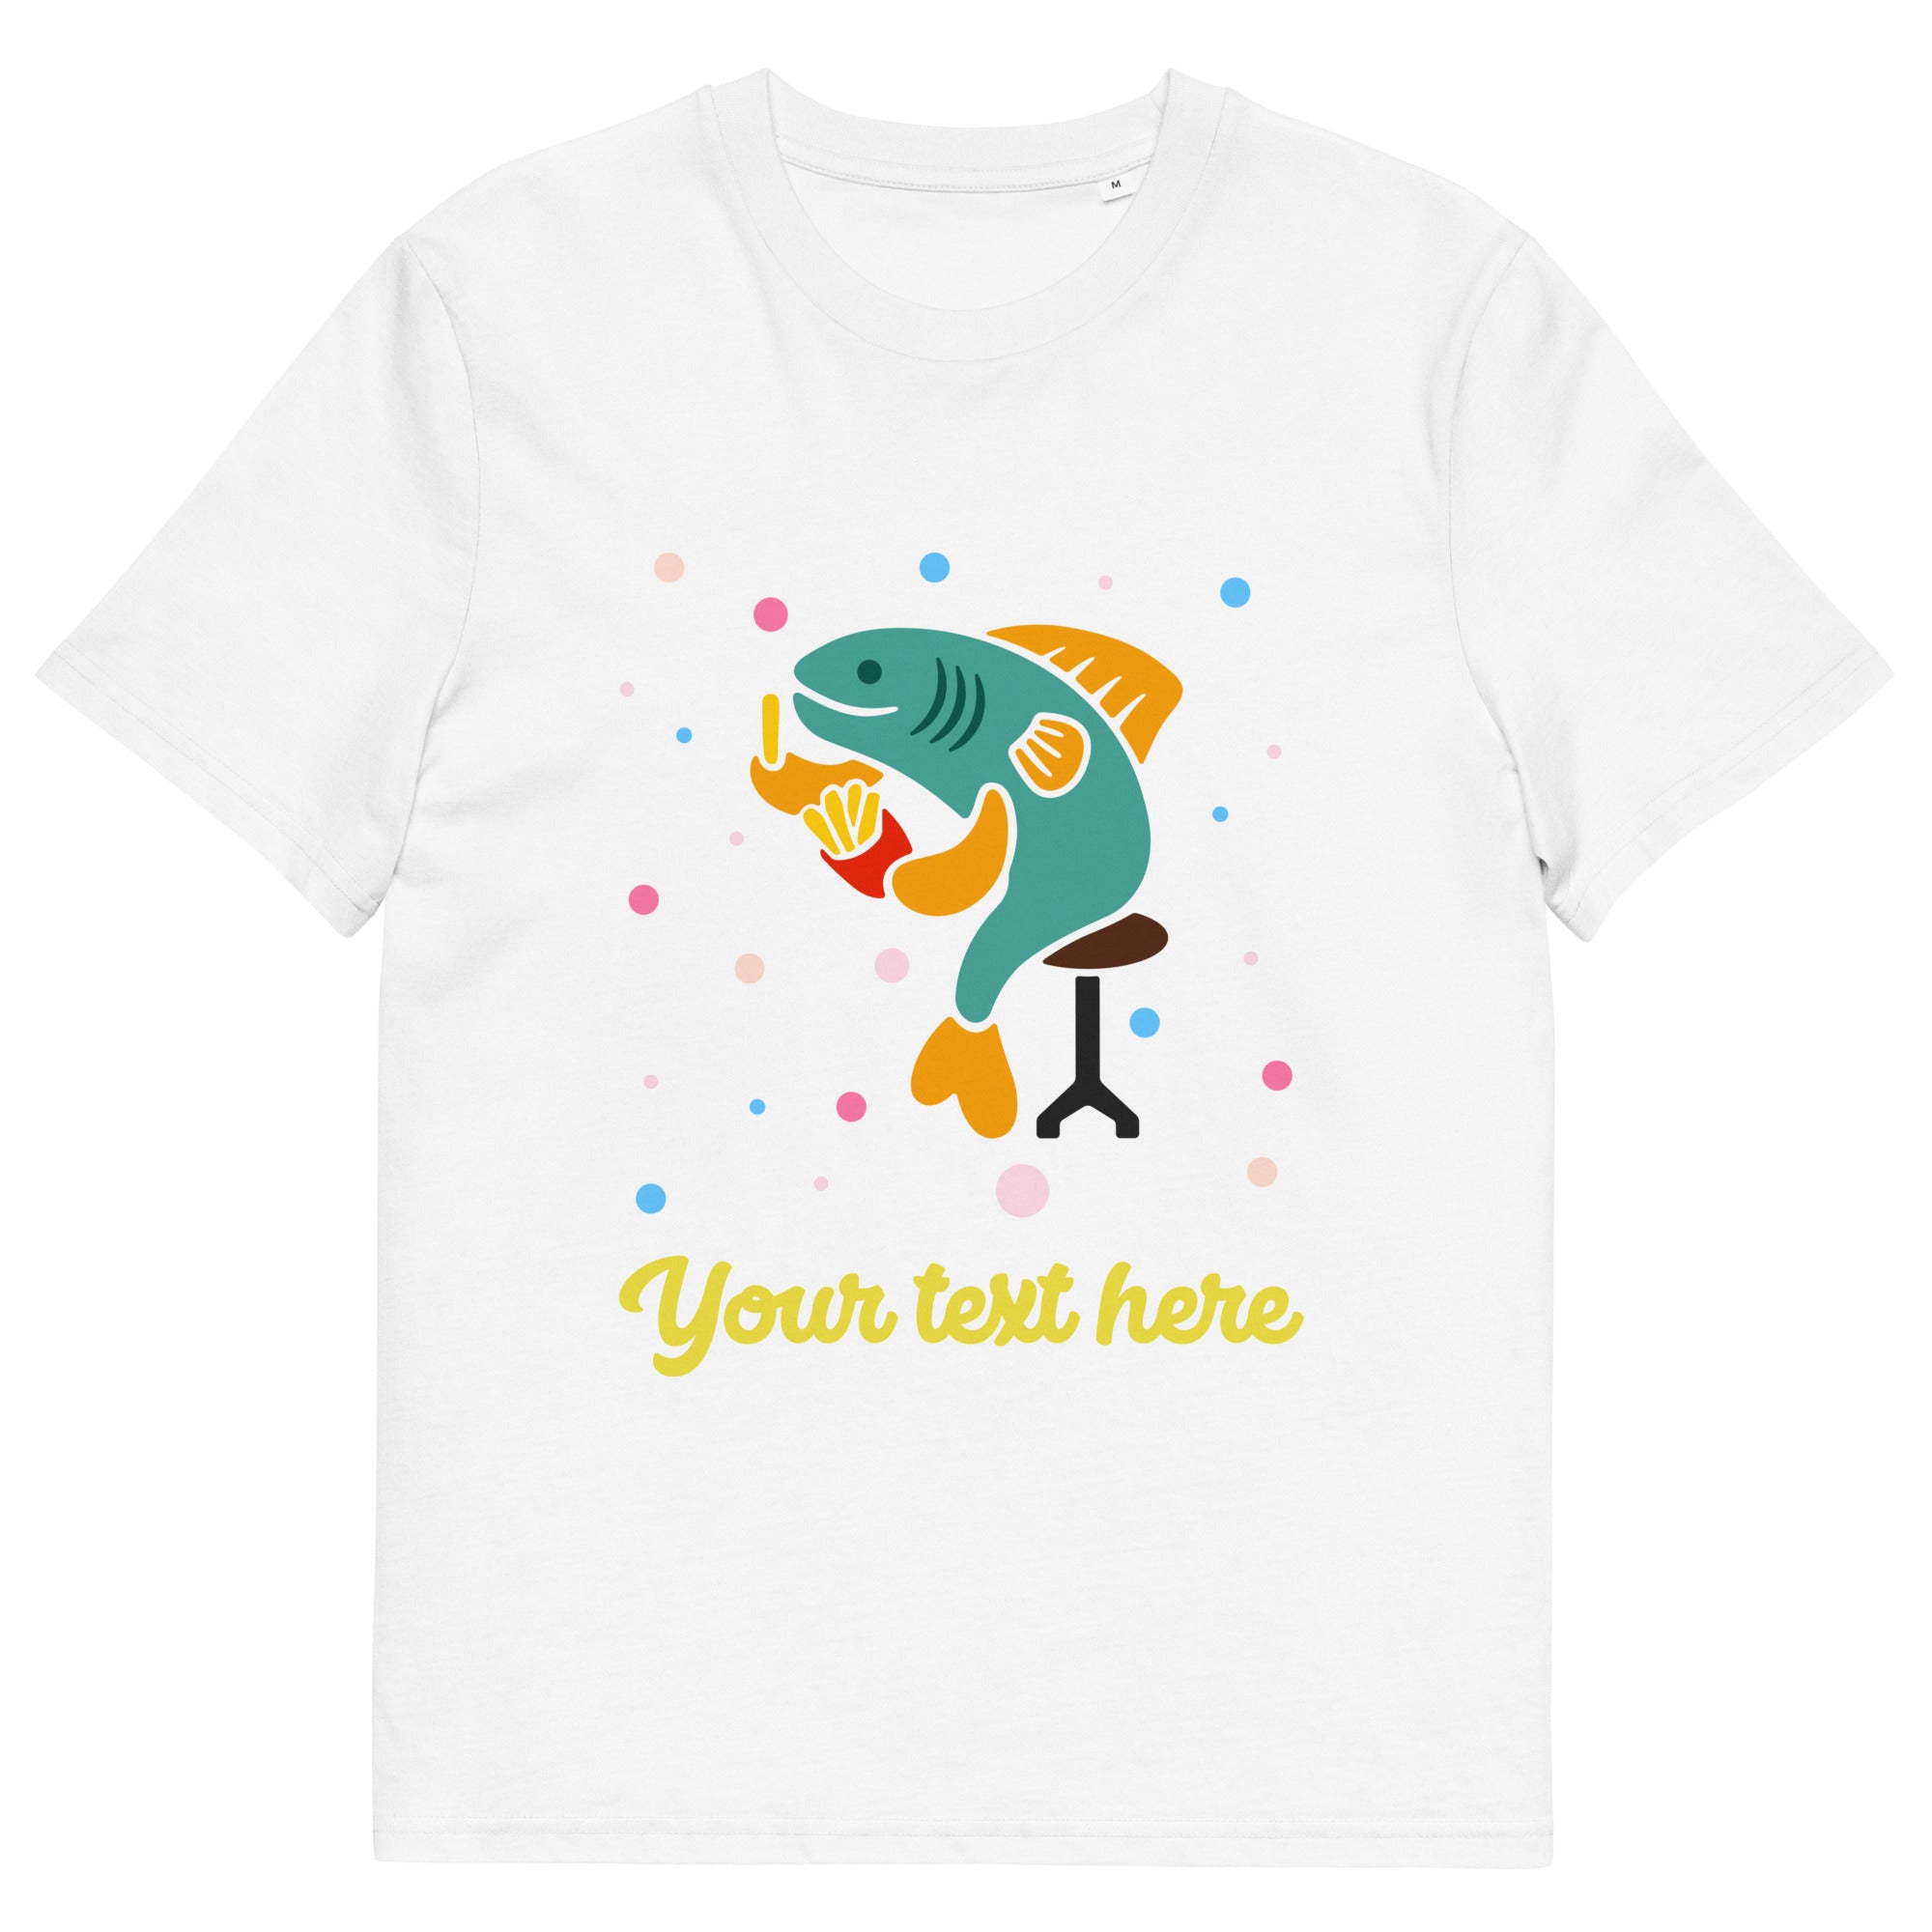 Personalised Custom Text - Organic Cotton Adults Unisex T-Shirt - London Doodles - Fish & Chips - White